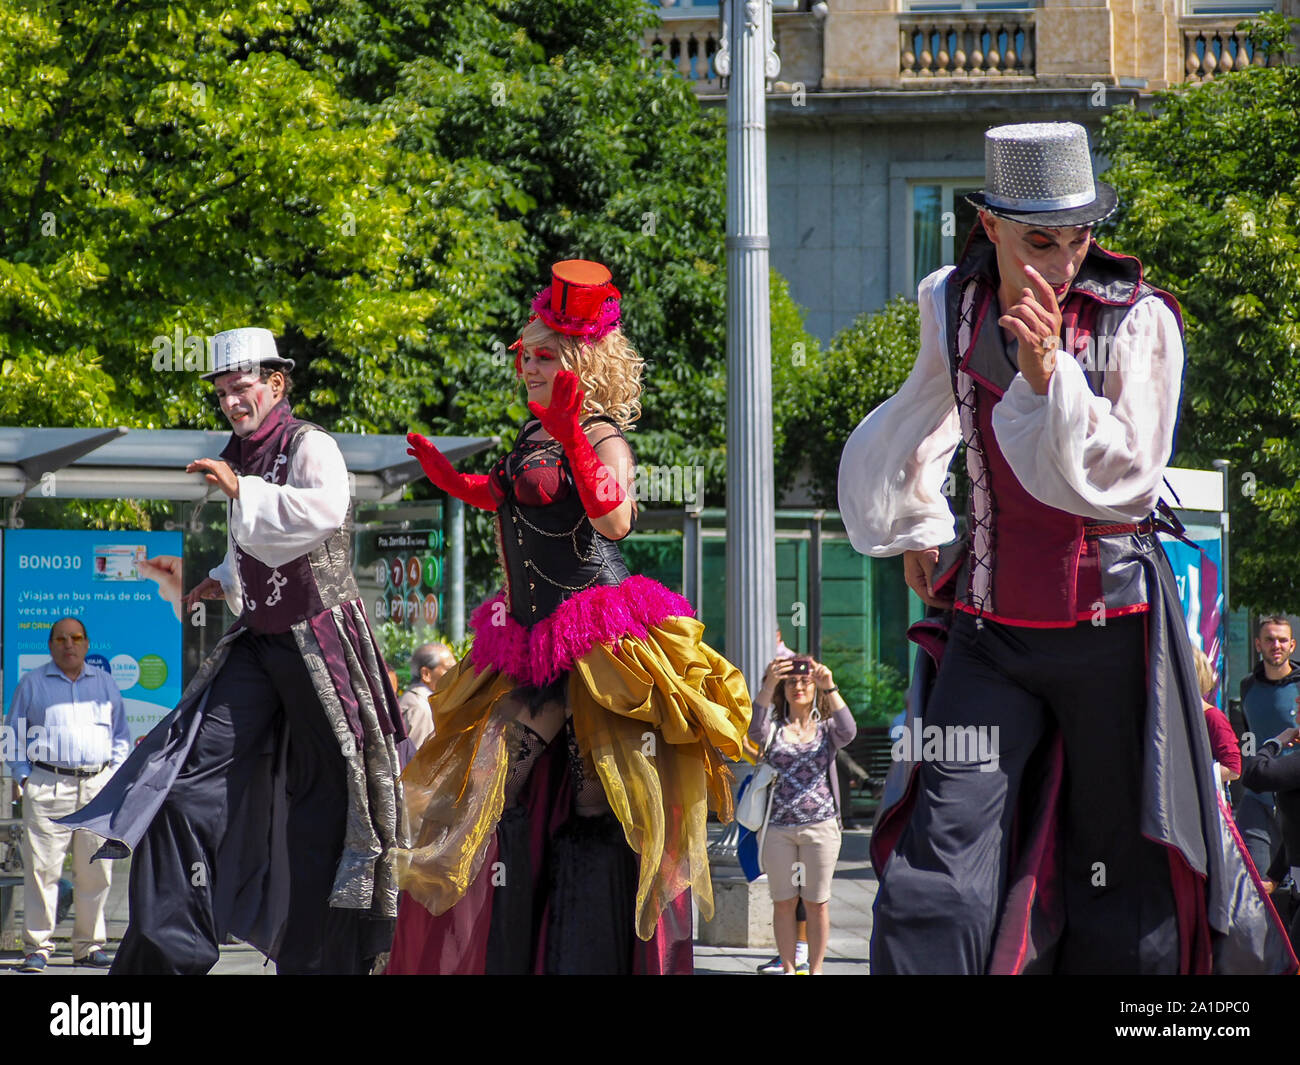 Dancers on stilts during the XV Intercultural Week Parade in Valladolid Stock Photo